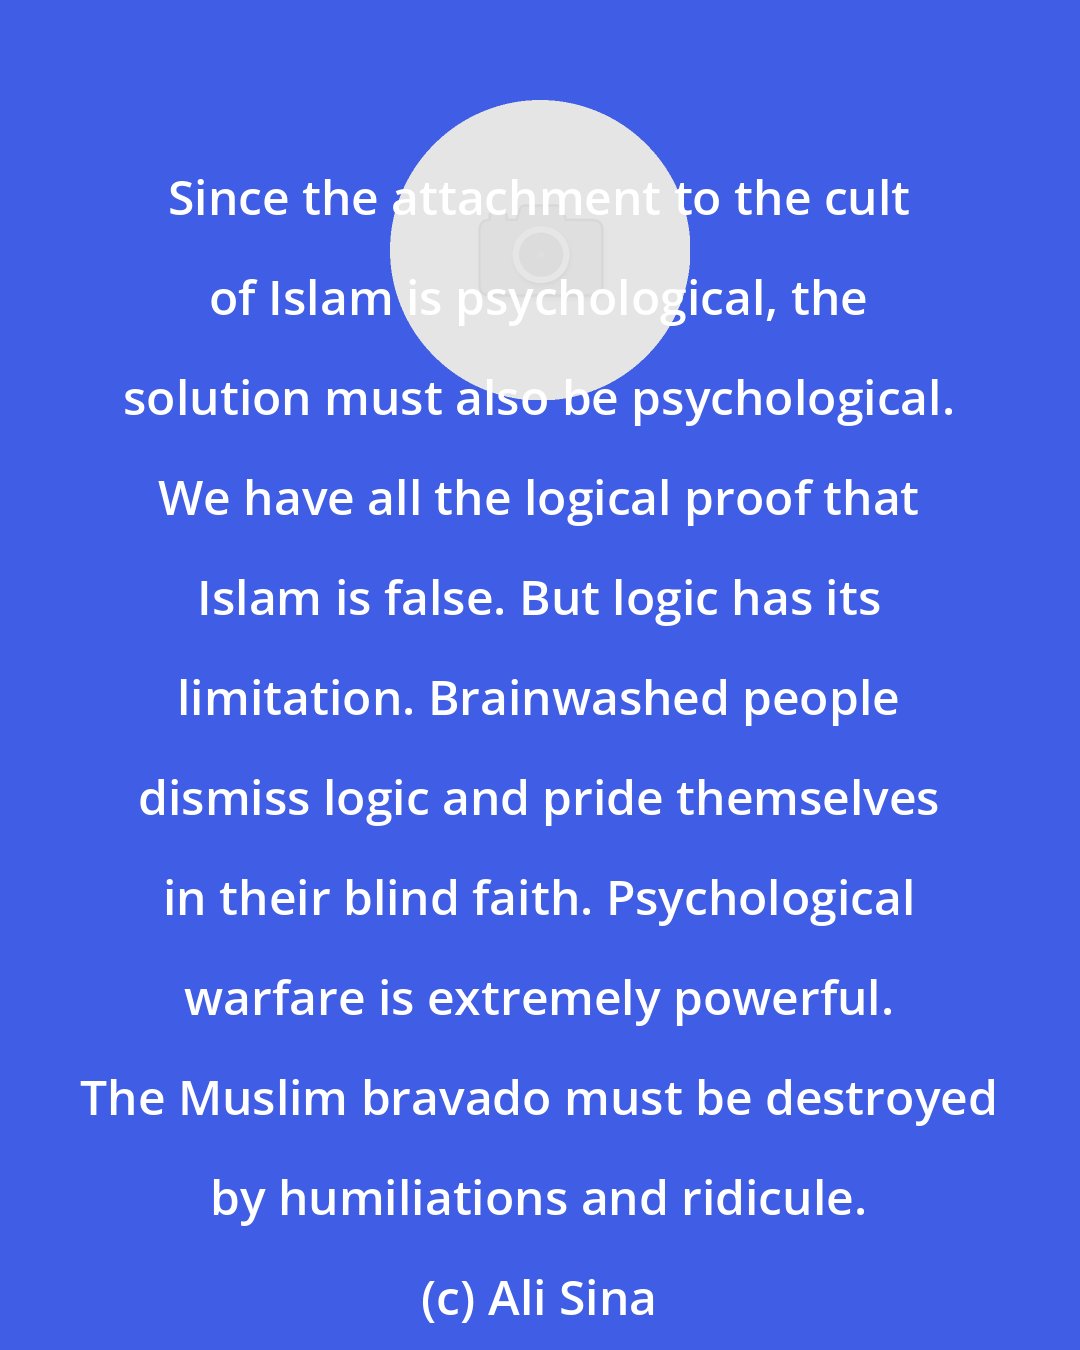 Ali Sina: Since the attachment to the cult of Islam is psychological, the solution must also be psychological. We have all the logical proof that Islam is false. But logic has its limitation. Brainwashed people dismiss logic and pride themselves in their blind faith. Psychological warfare is extremely powerful. The Muslim bravado must be destroyed by humiliations and ridicule.